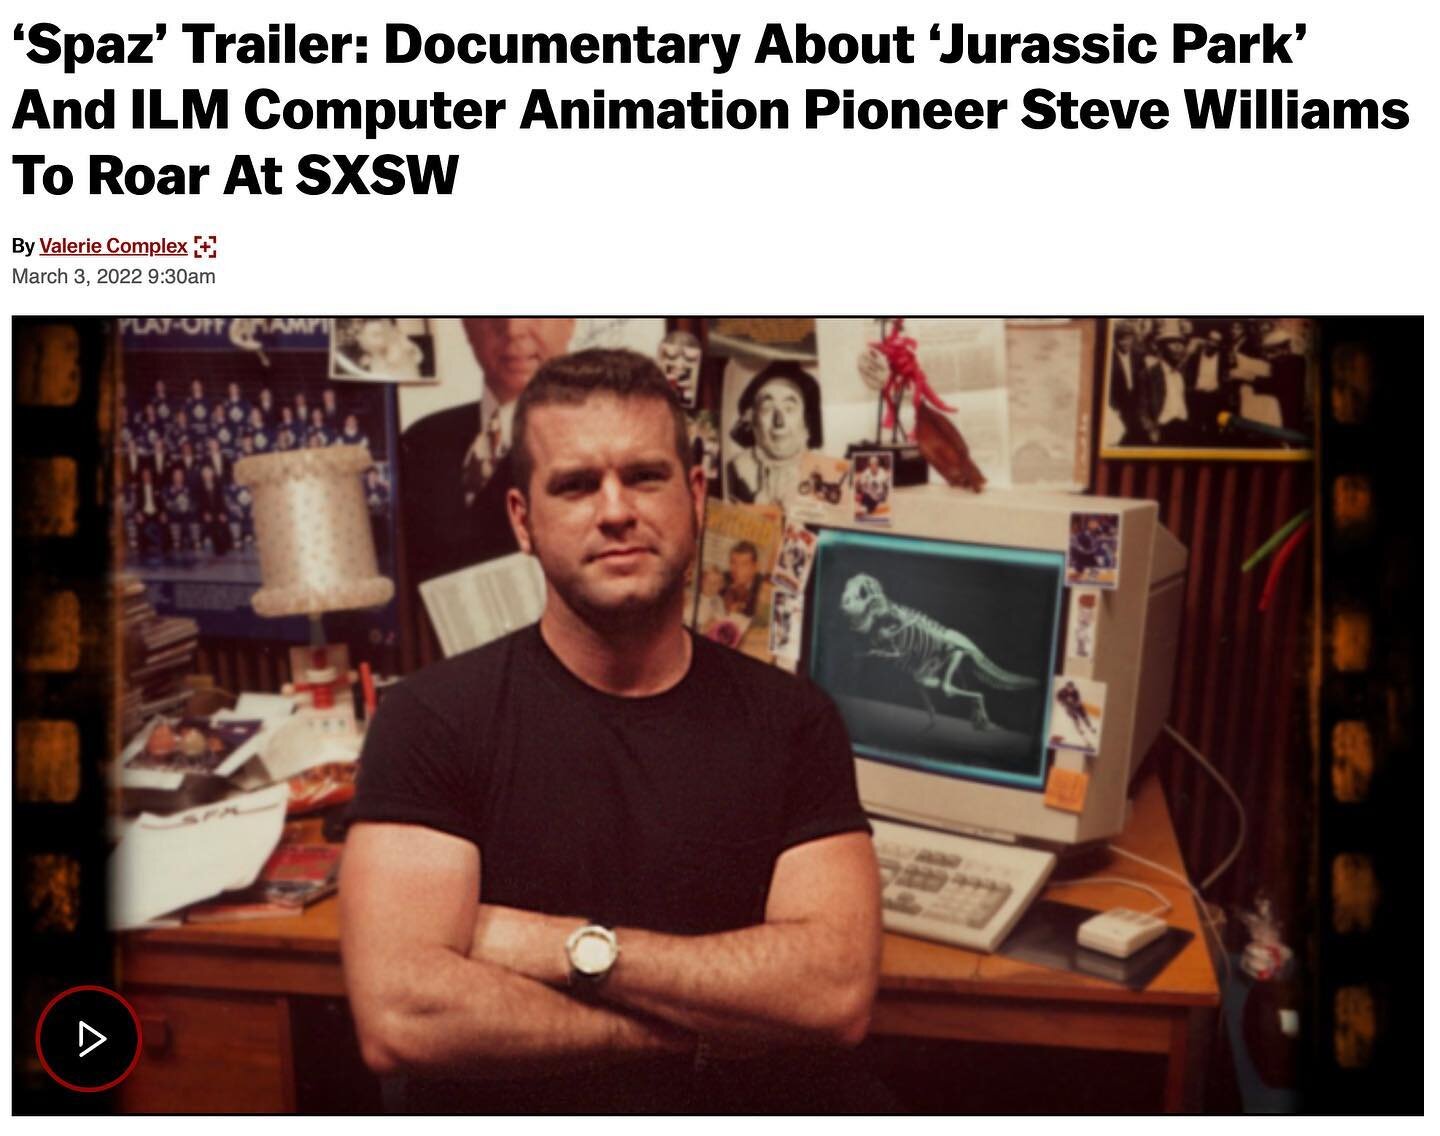 Fans of Jurassic Park&hellip; check out this documentary! Premieres at SXSW 3/14